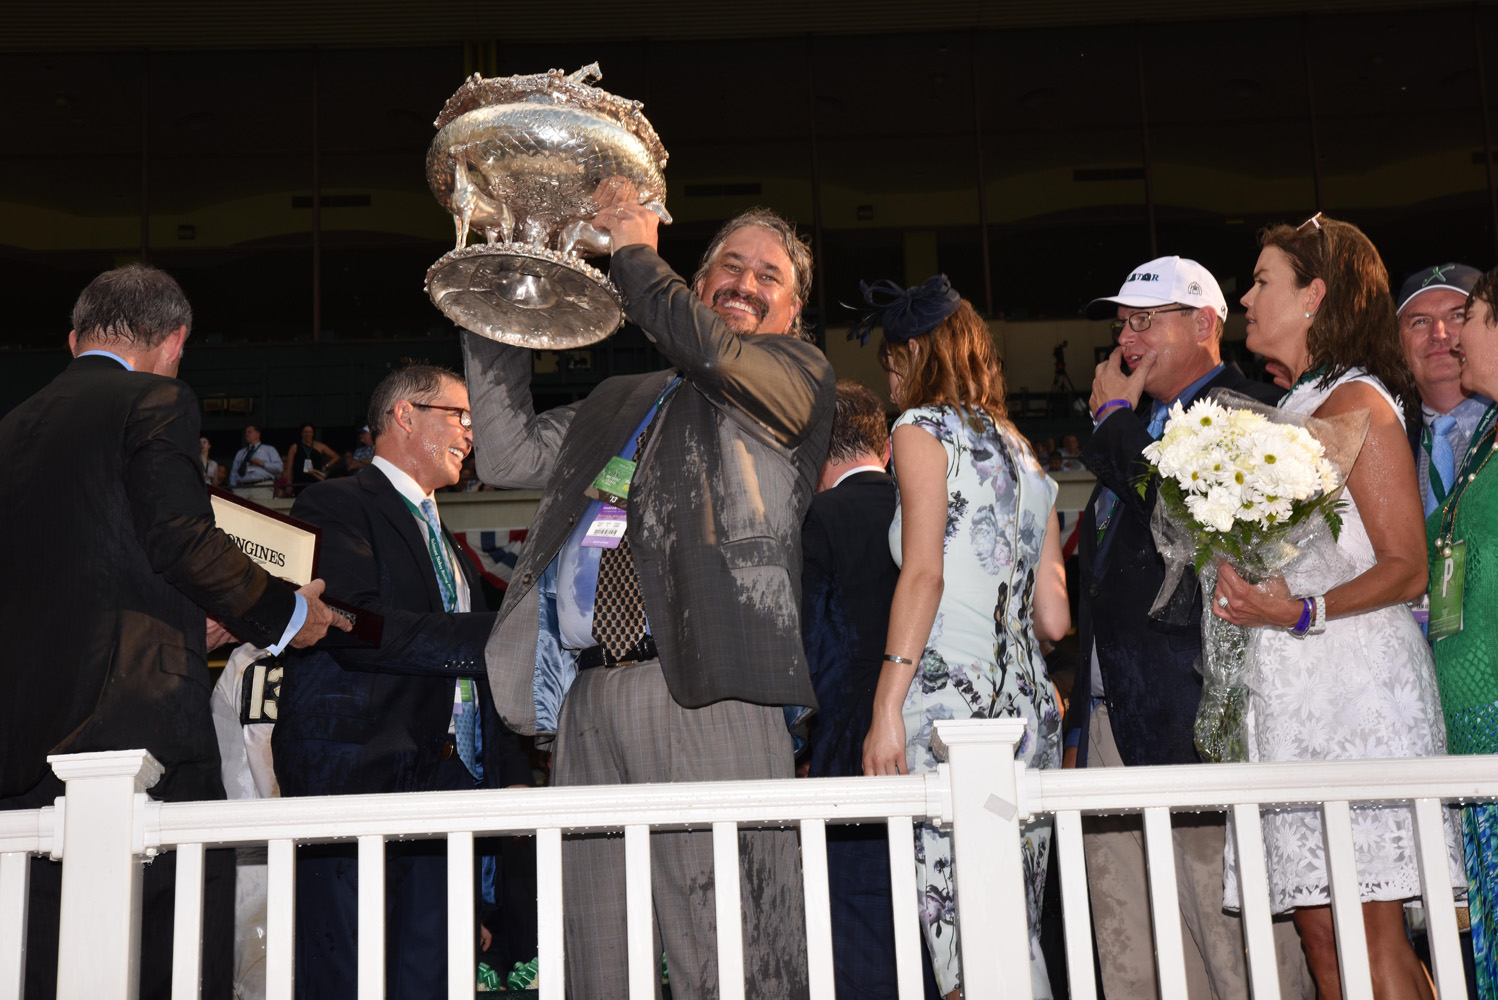 Steve Asmussen holds up the August Belmont Memorial Trophy after winning his first Belmont Stakes with Creator in 2016 (NYRA)